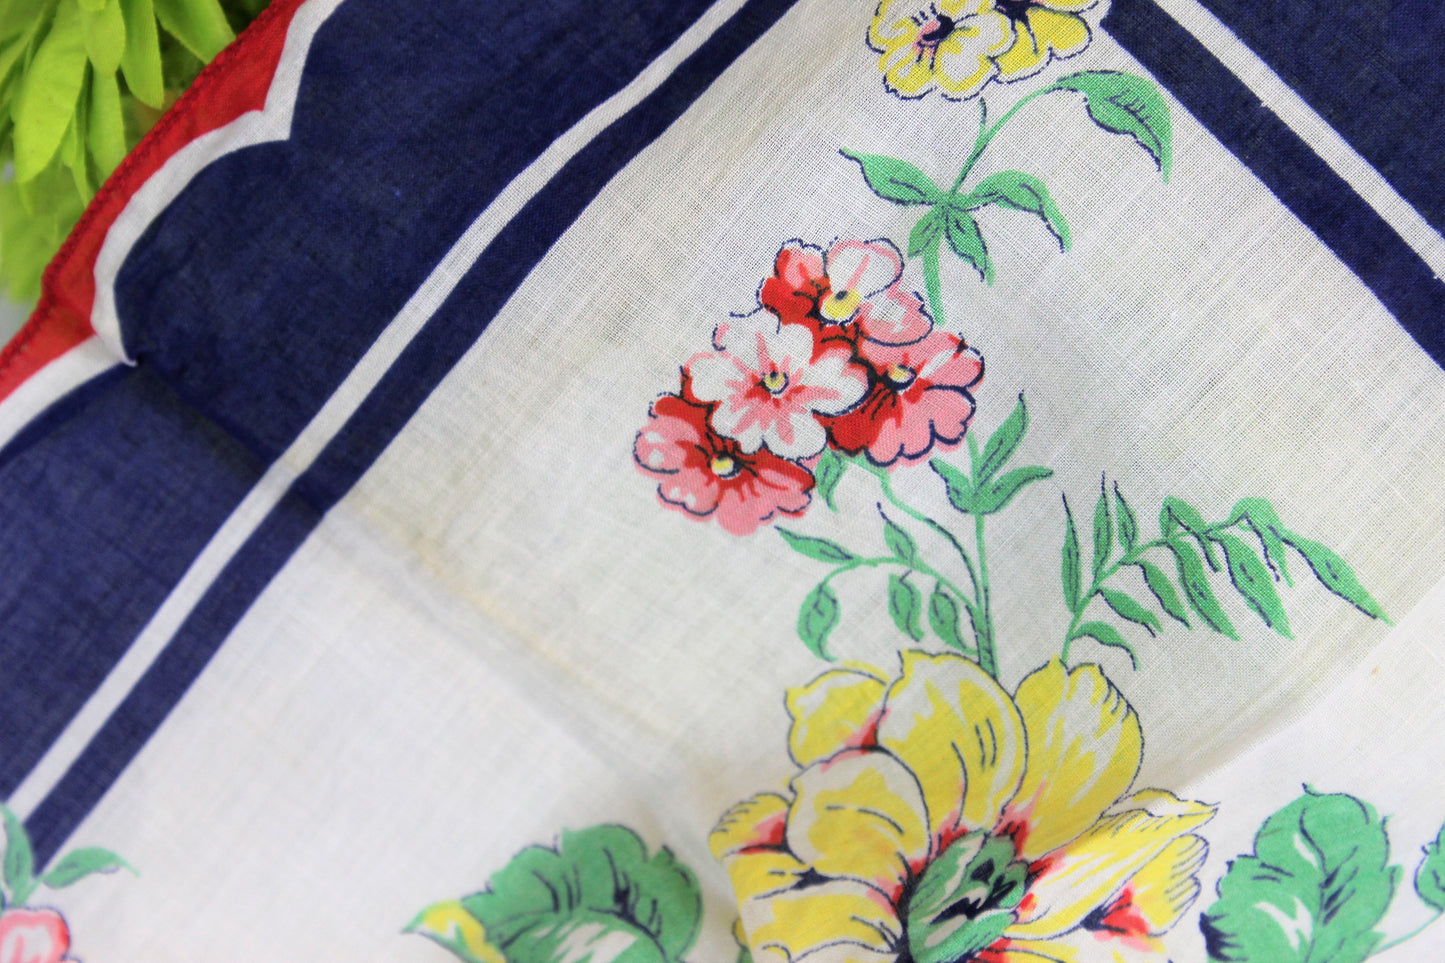 Vintage 1940s Handkerchief In A Blue Yellow And Red Flower Print